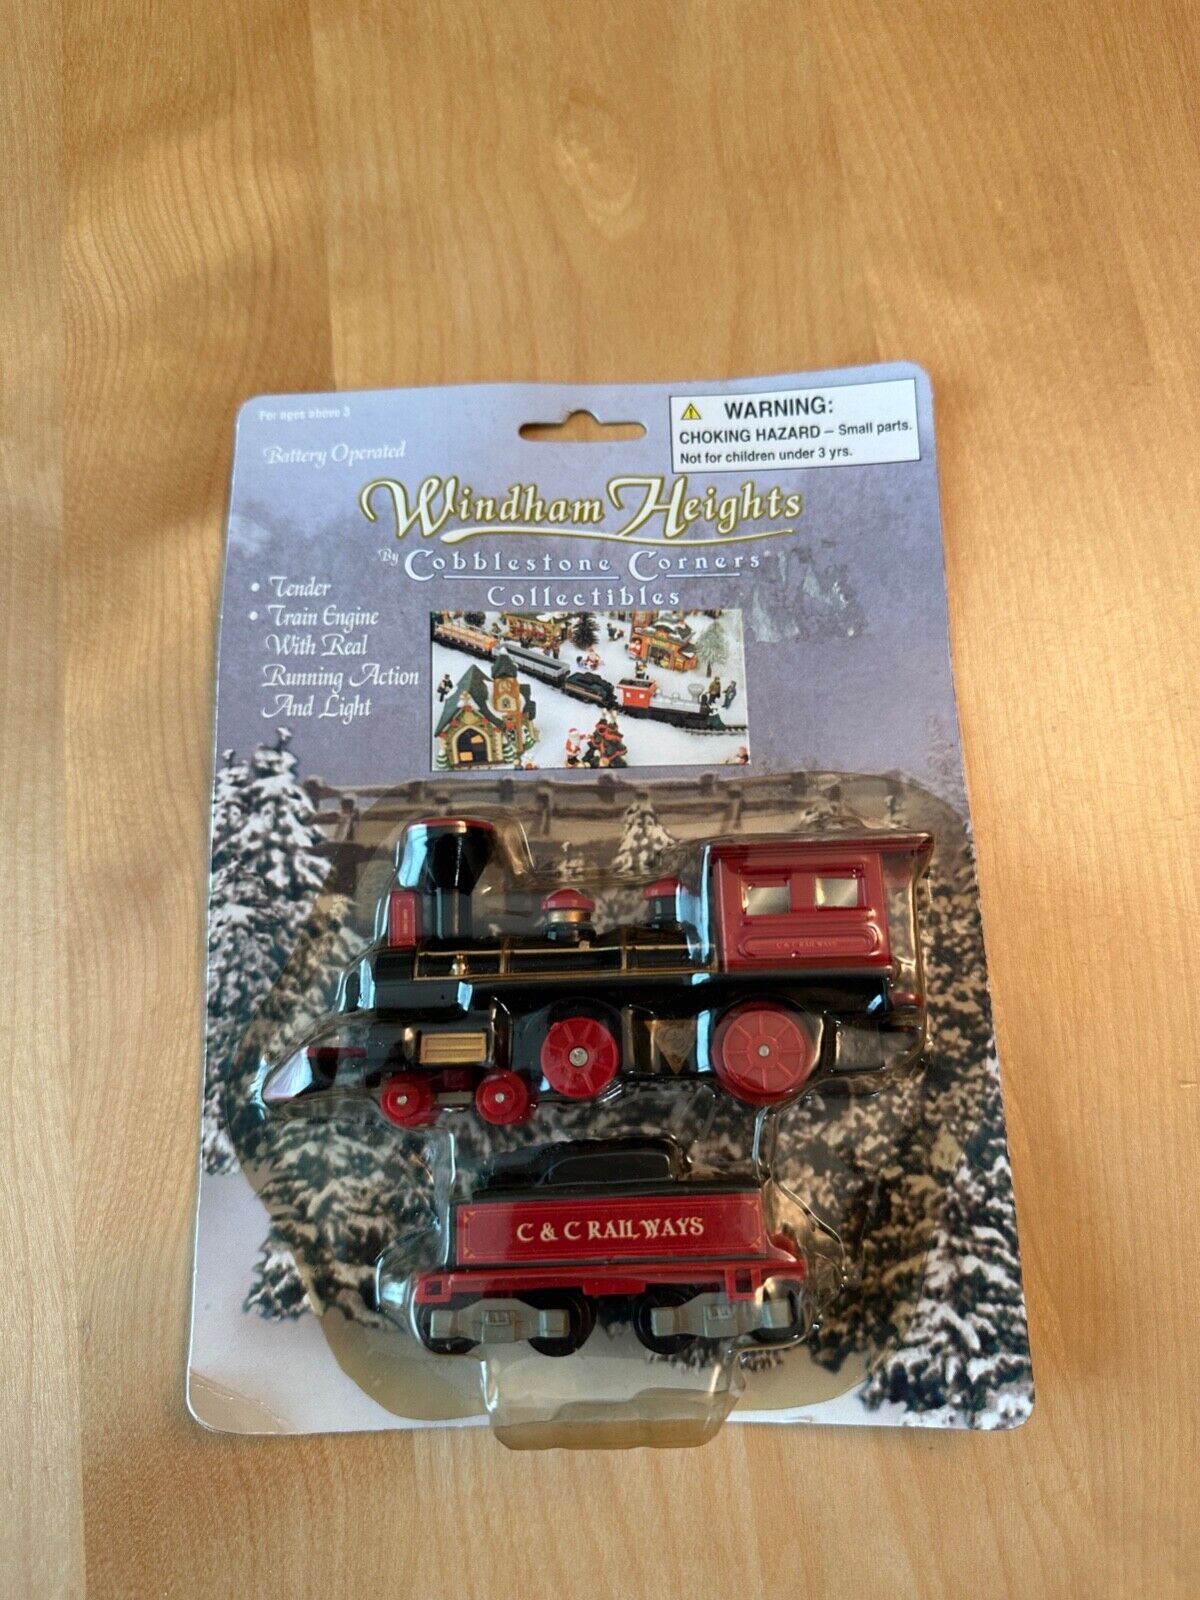 Windham Heights Cobblestone Corners Collectibles BATTERY OPERATED Train & TENDER